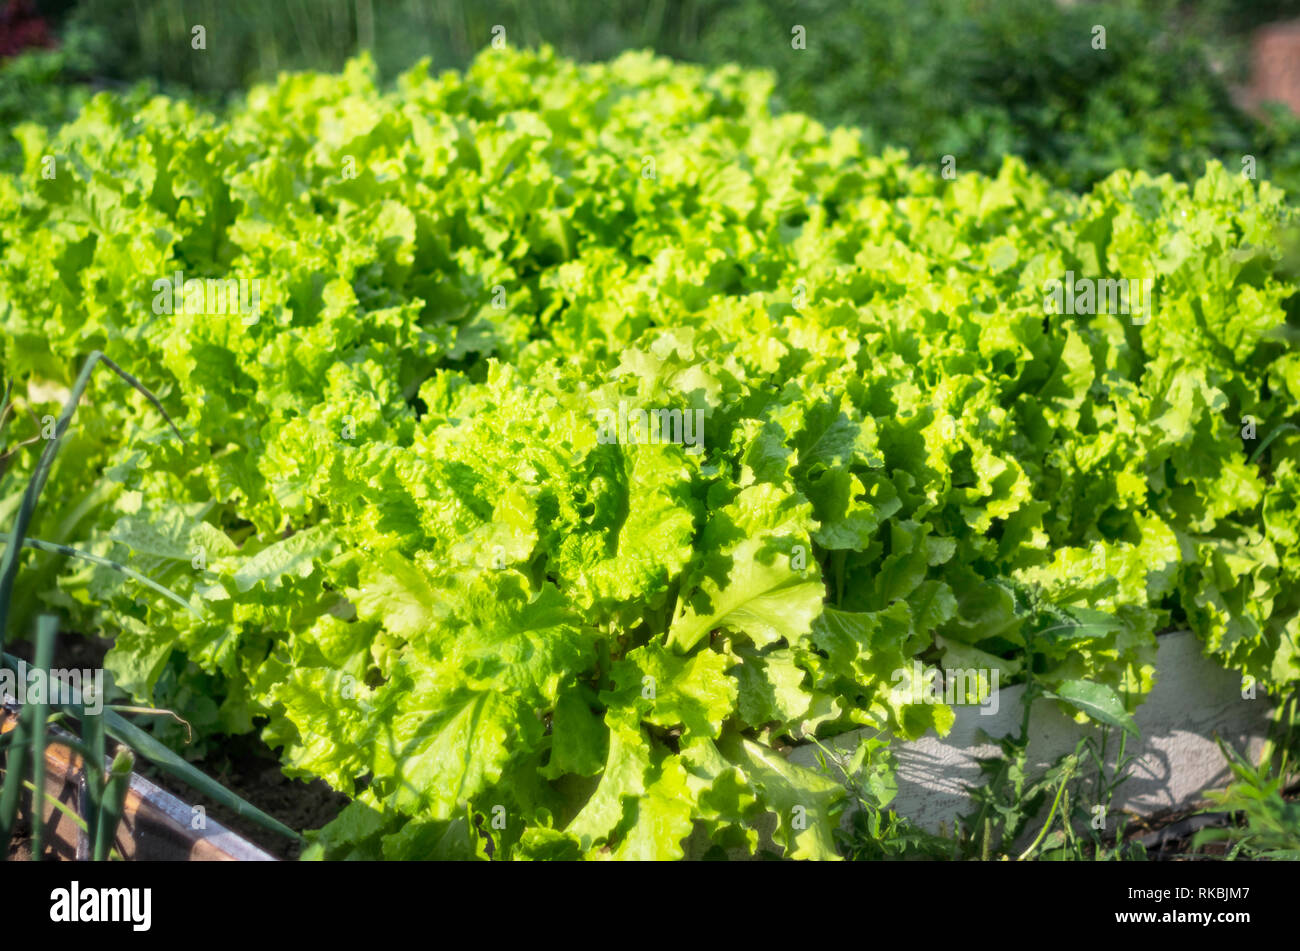 Organic Gardening Concept. Green Lettuce Growing in the Vegetable Garden on a Summer Morning. Healthy Eating Concept Stock Photo